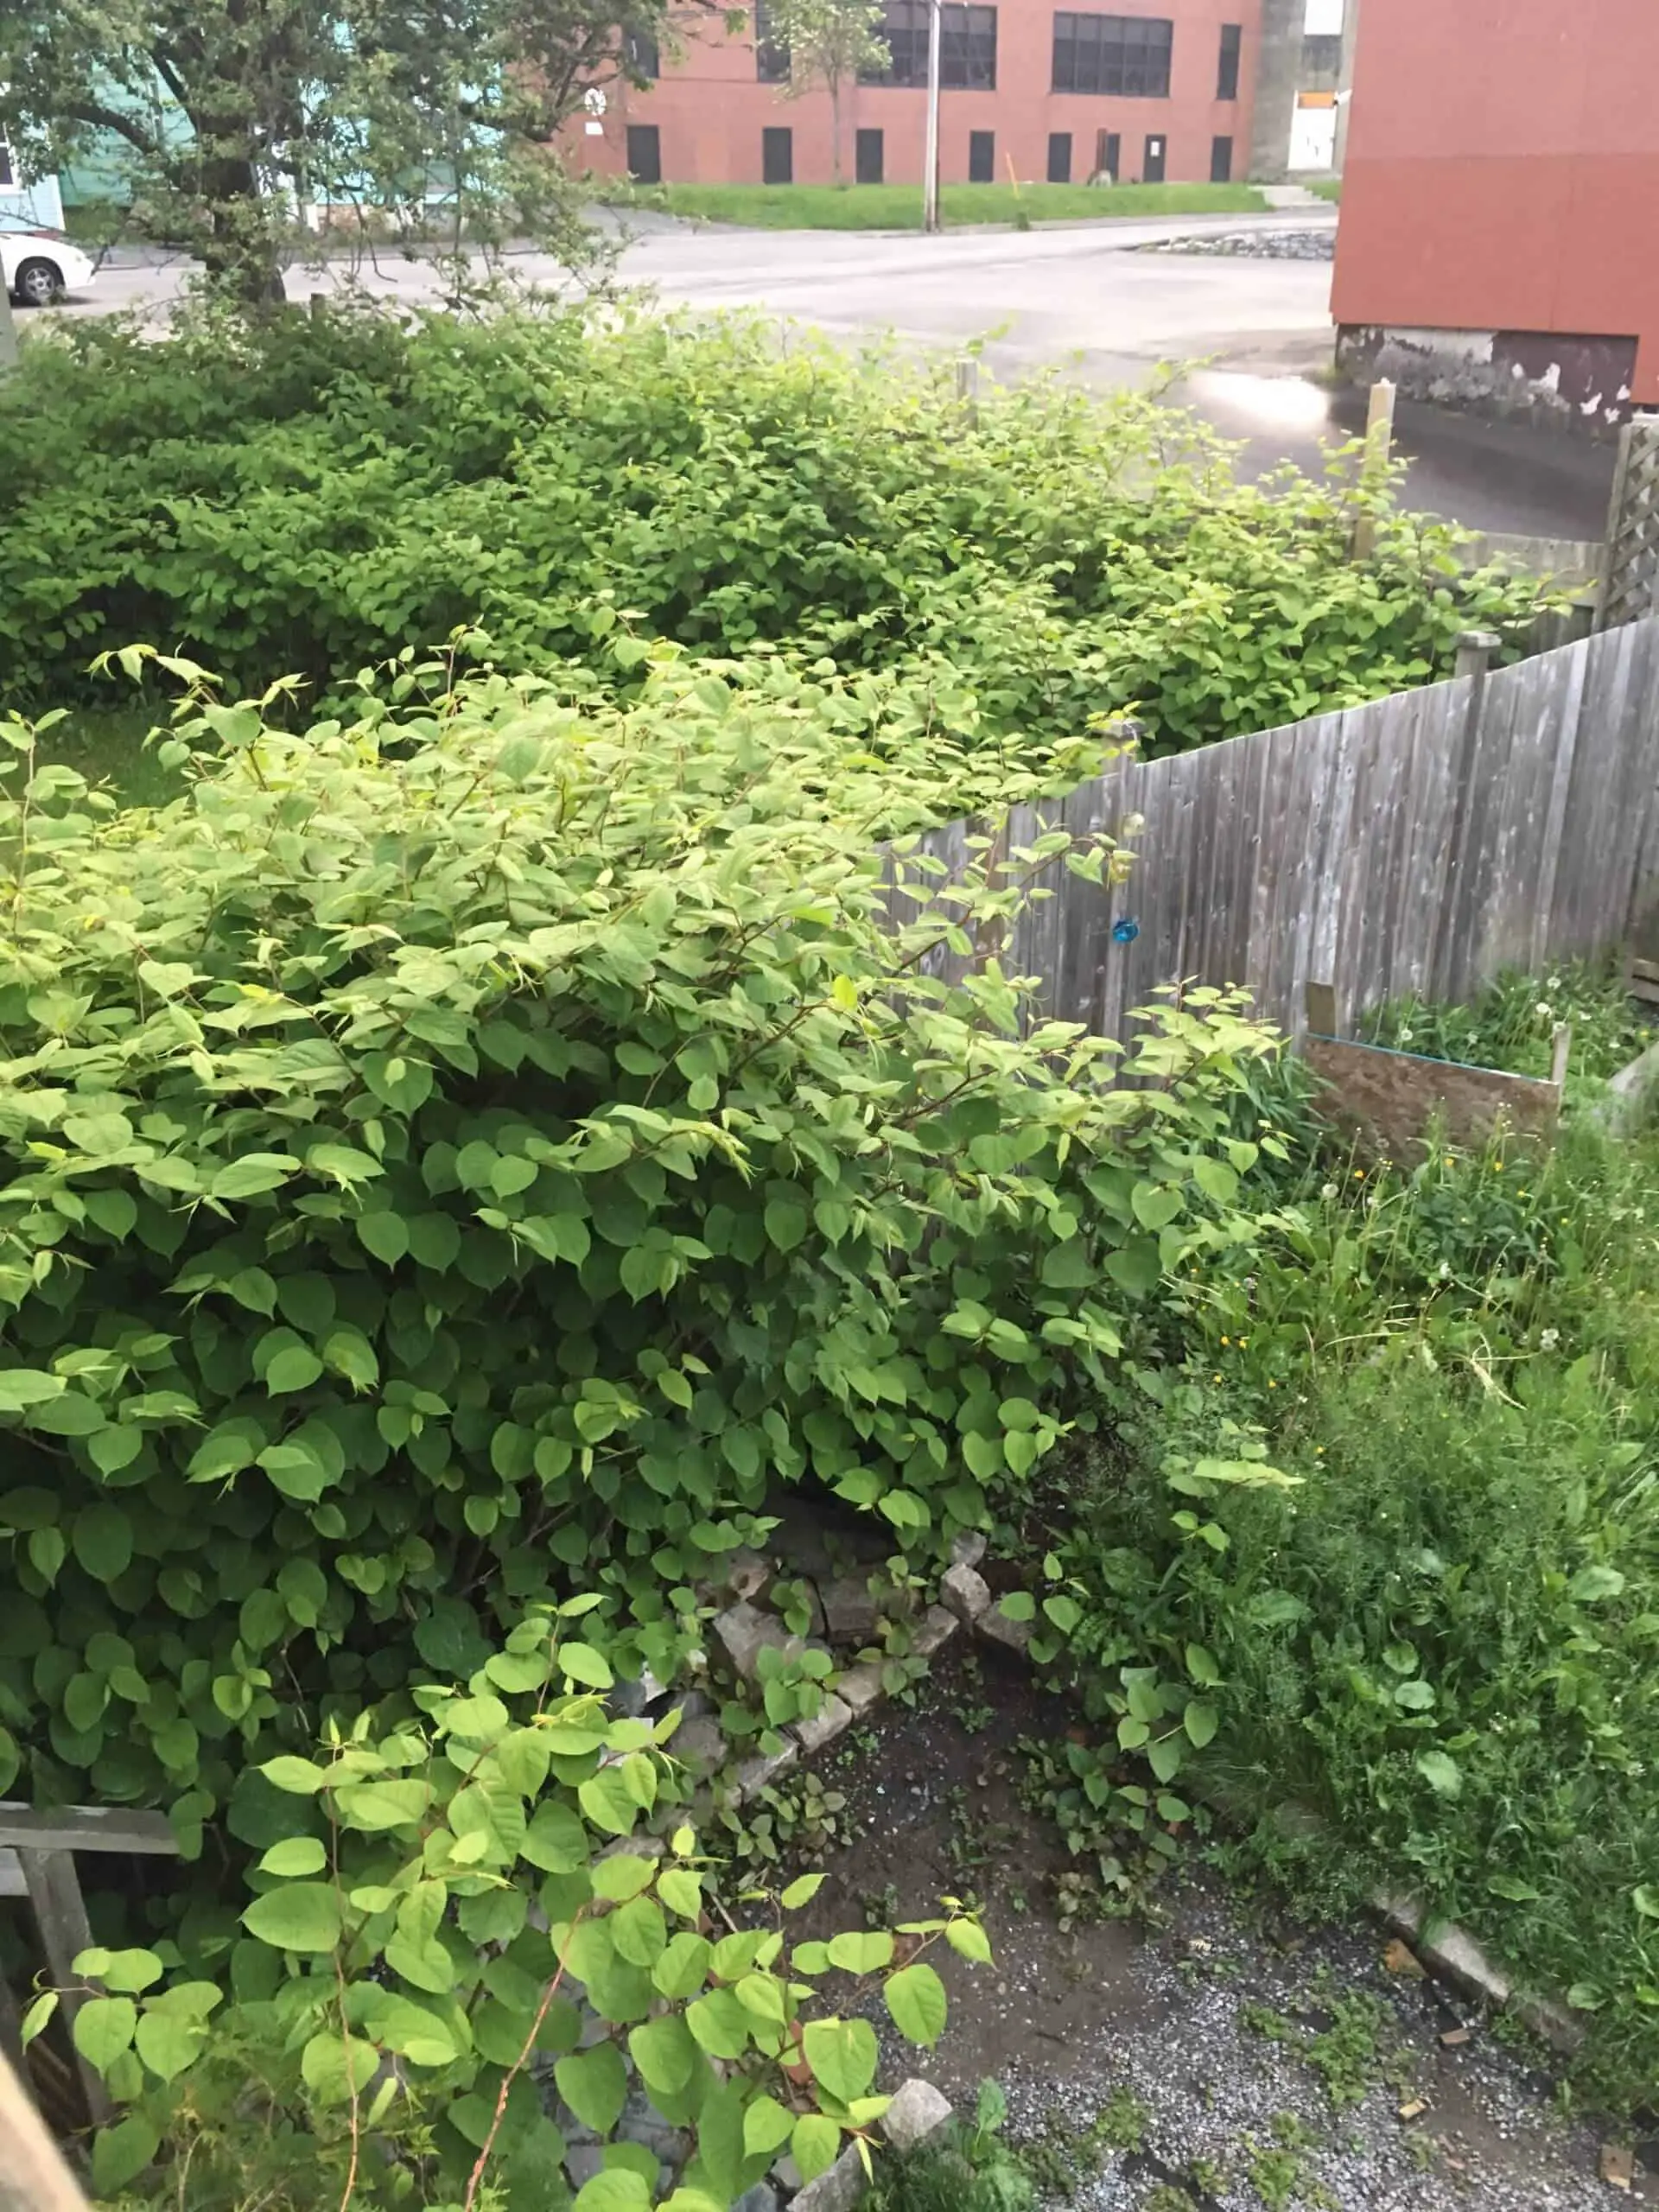 Japanese knotweed can cross boundaries and cause legal disputes between property owners scaled